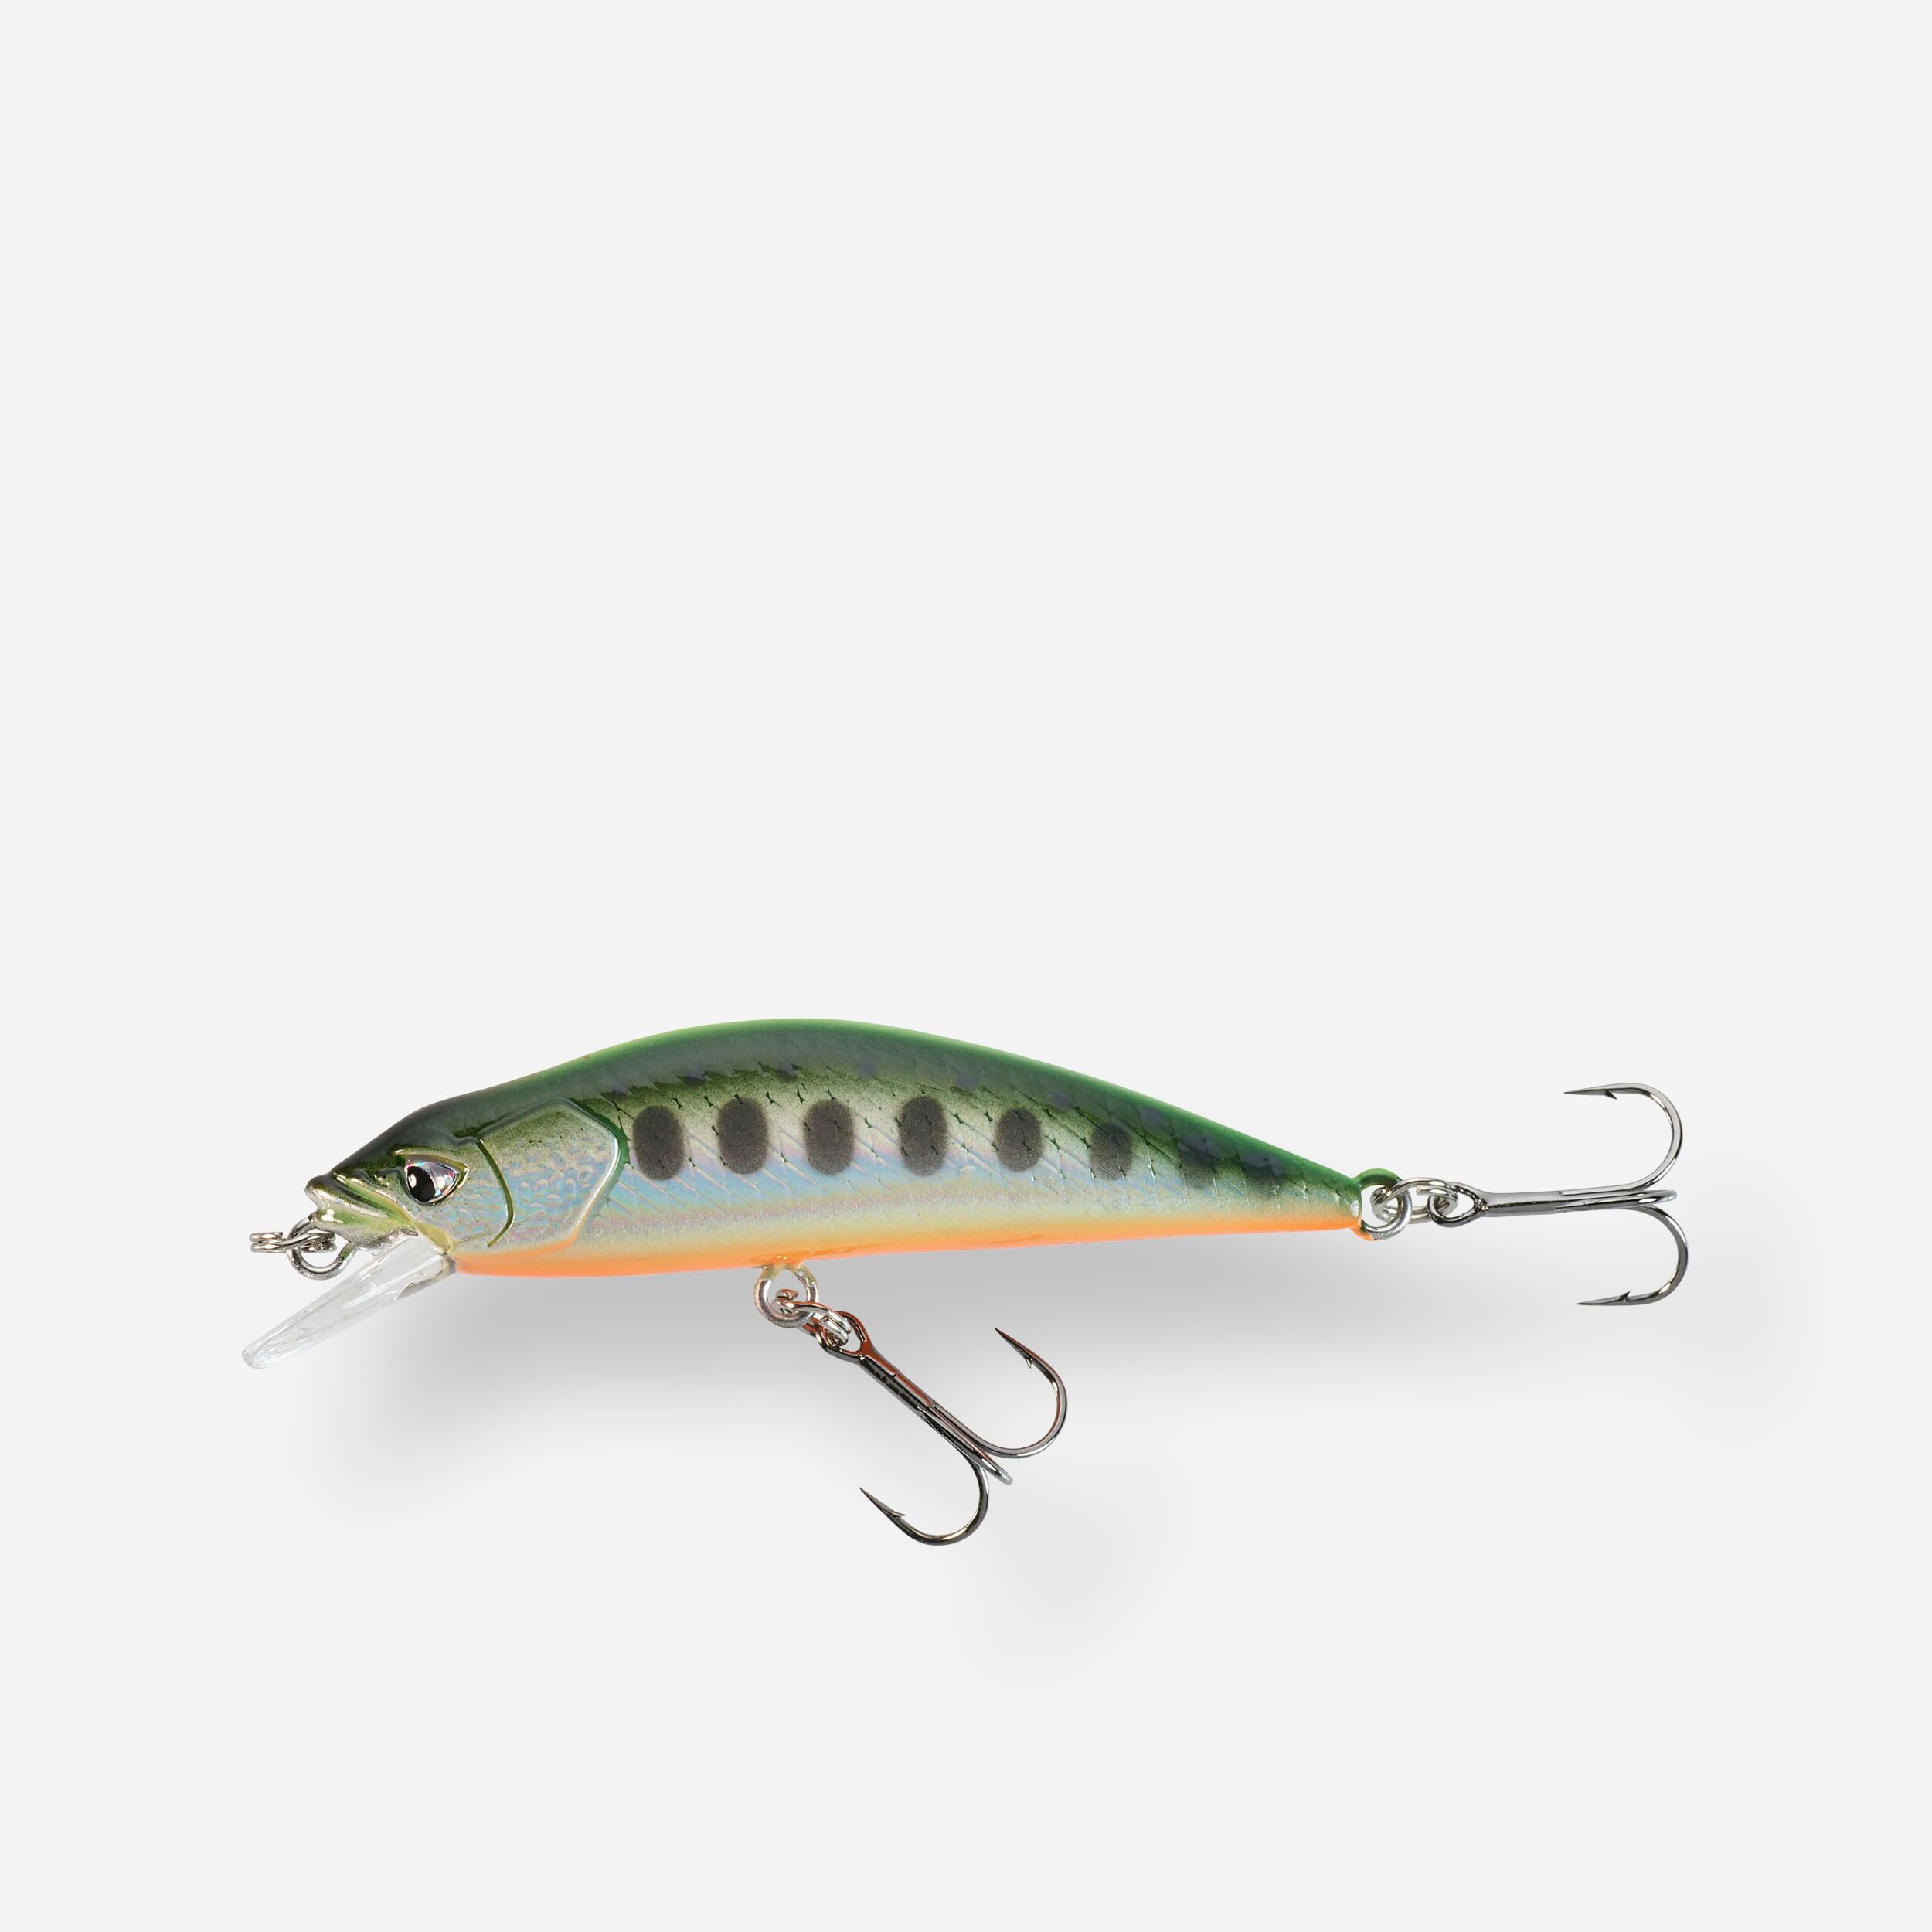 MINNOW HARD LURE FOR TROUT WXM  MNWFS 50 US YAMAME - NEON  1/4